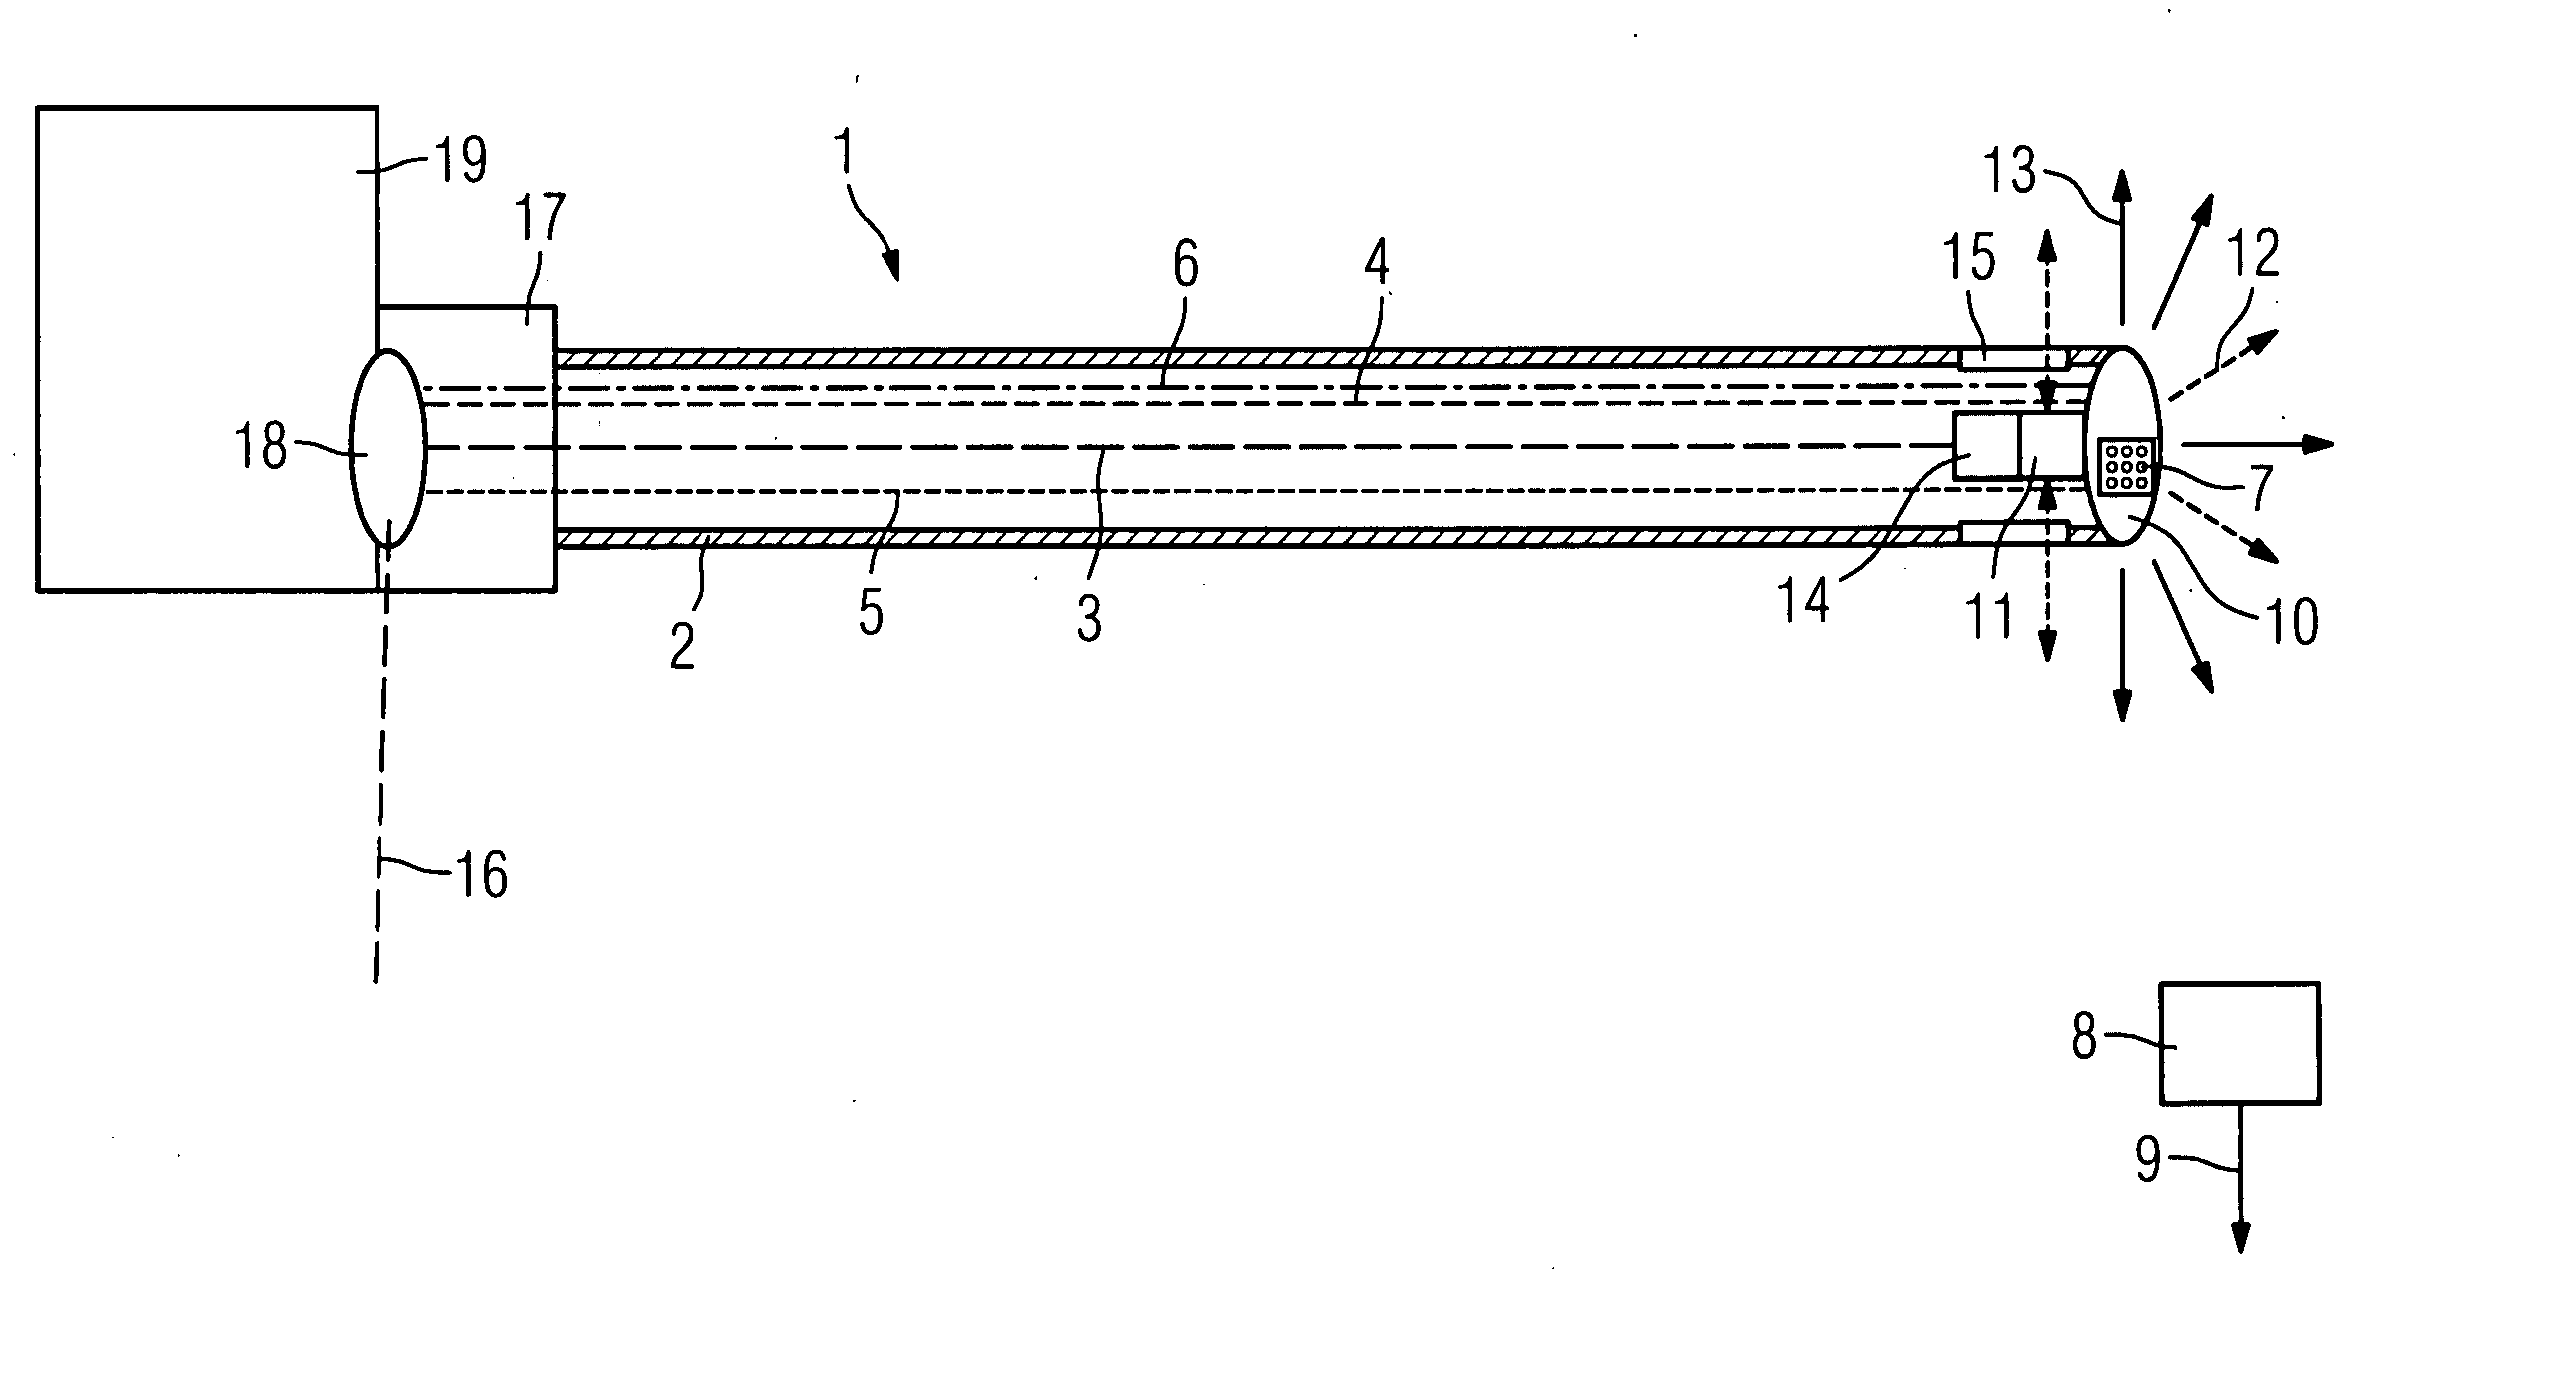 Catheter device with a position sensor system for treating a vessel blockage using image monitoring